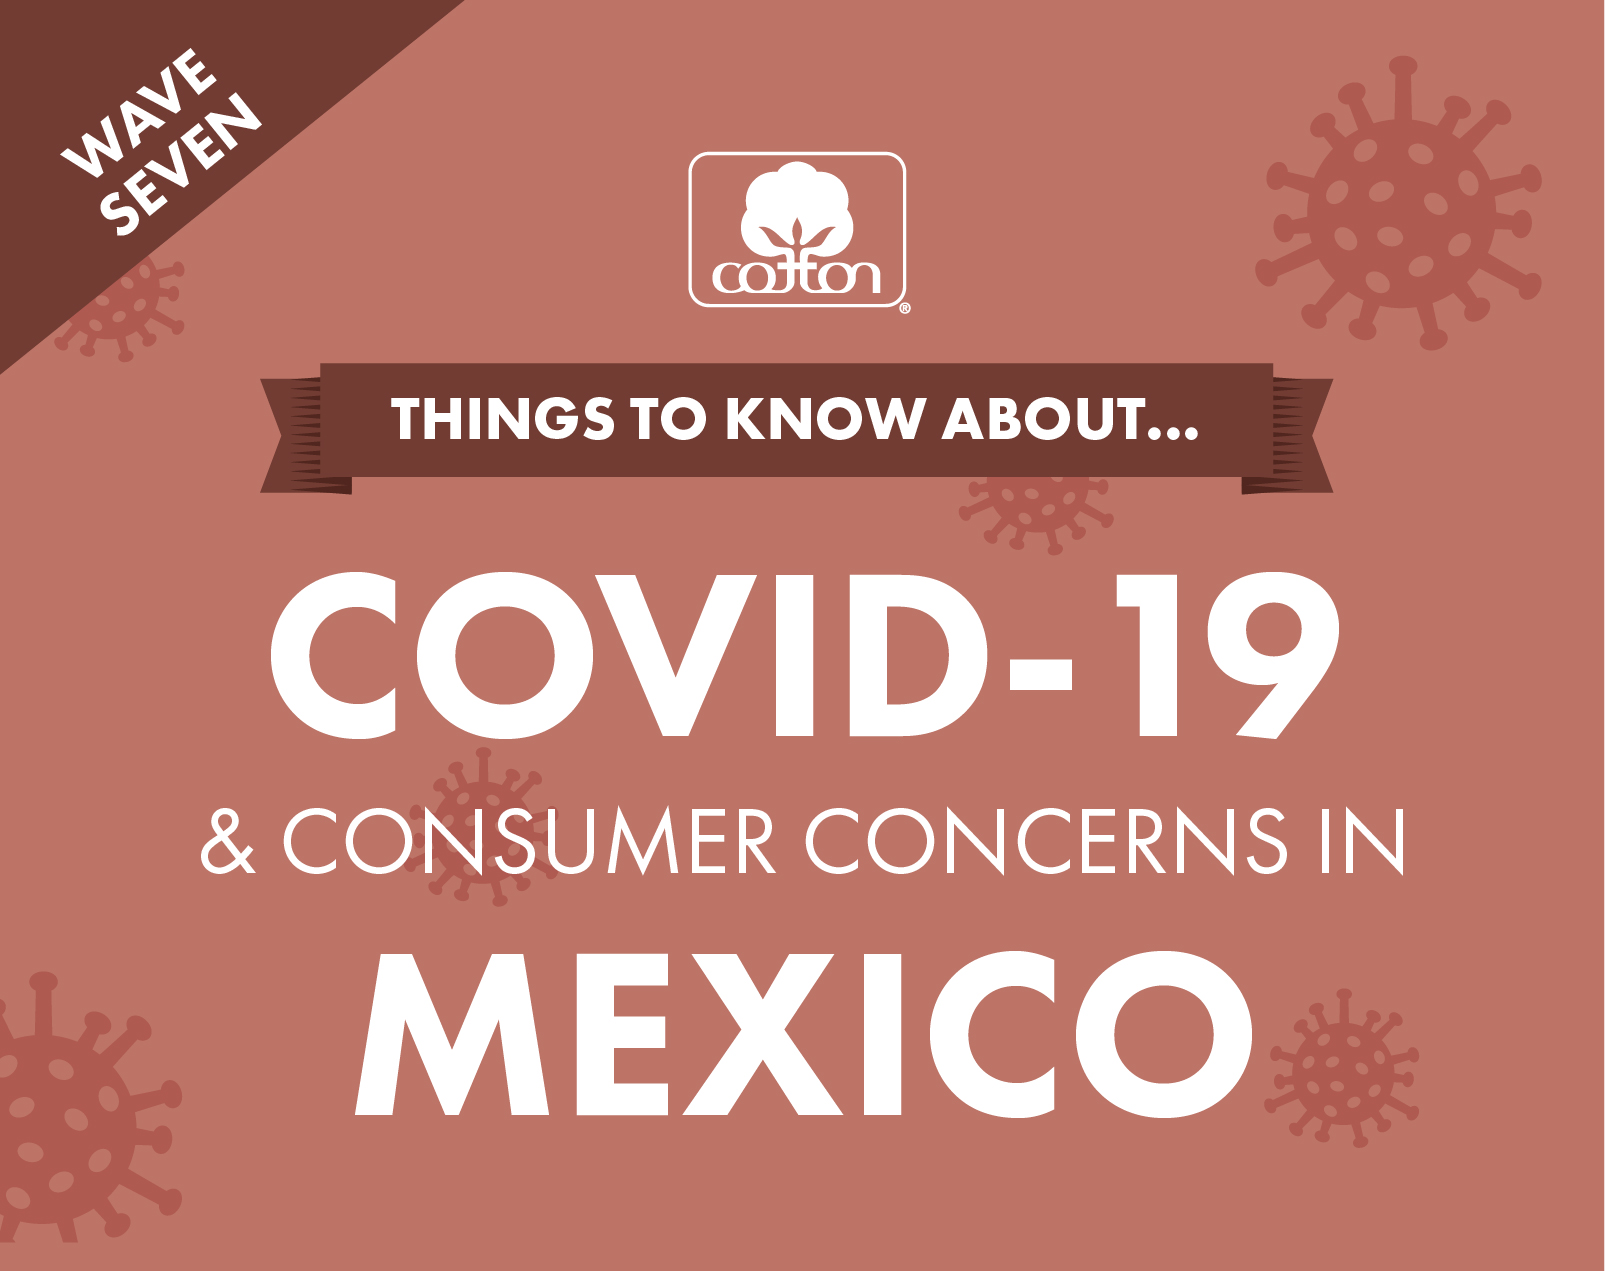 Index Image TTKA COVID 19 Wave7 Mexico - Supply Chain Insights